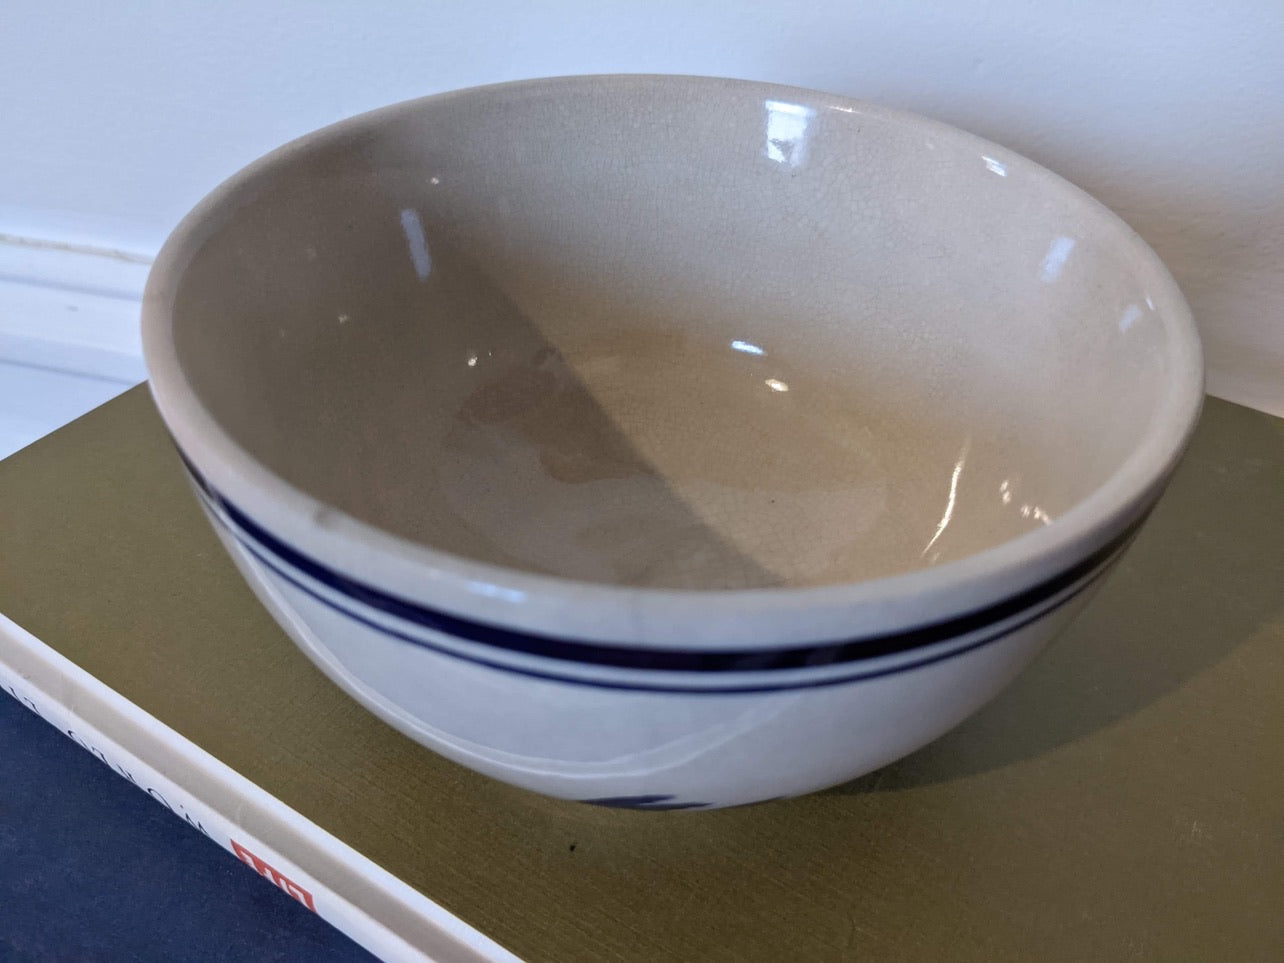 The Old Dutch Bowl